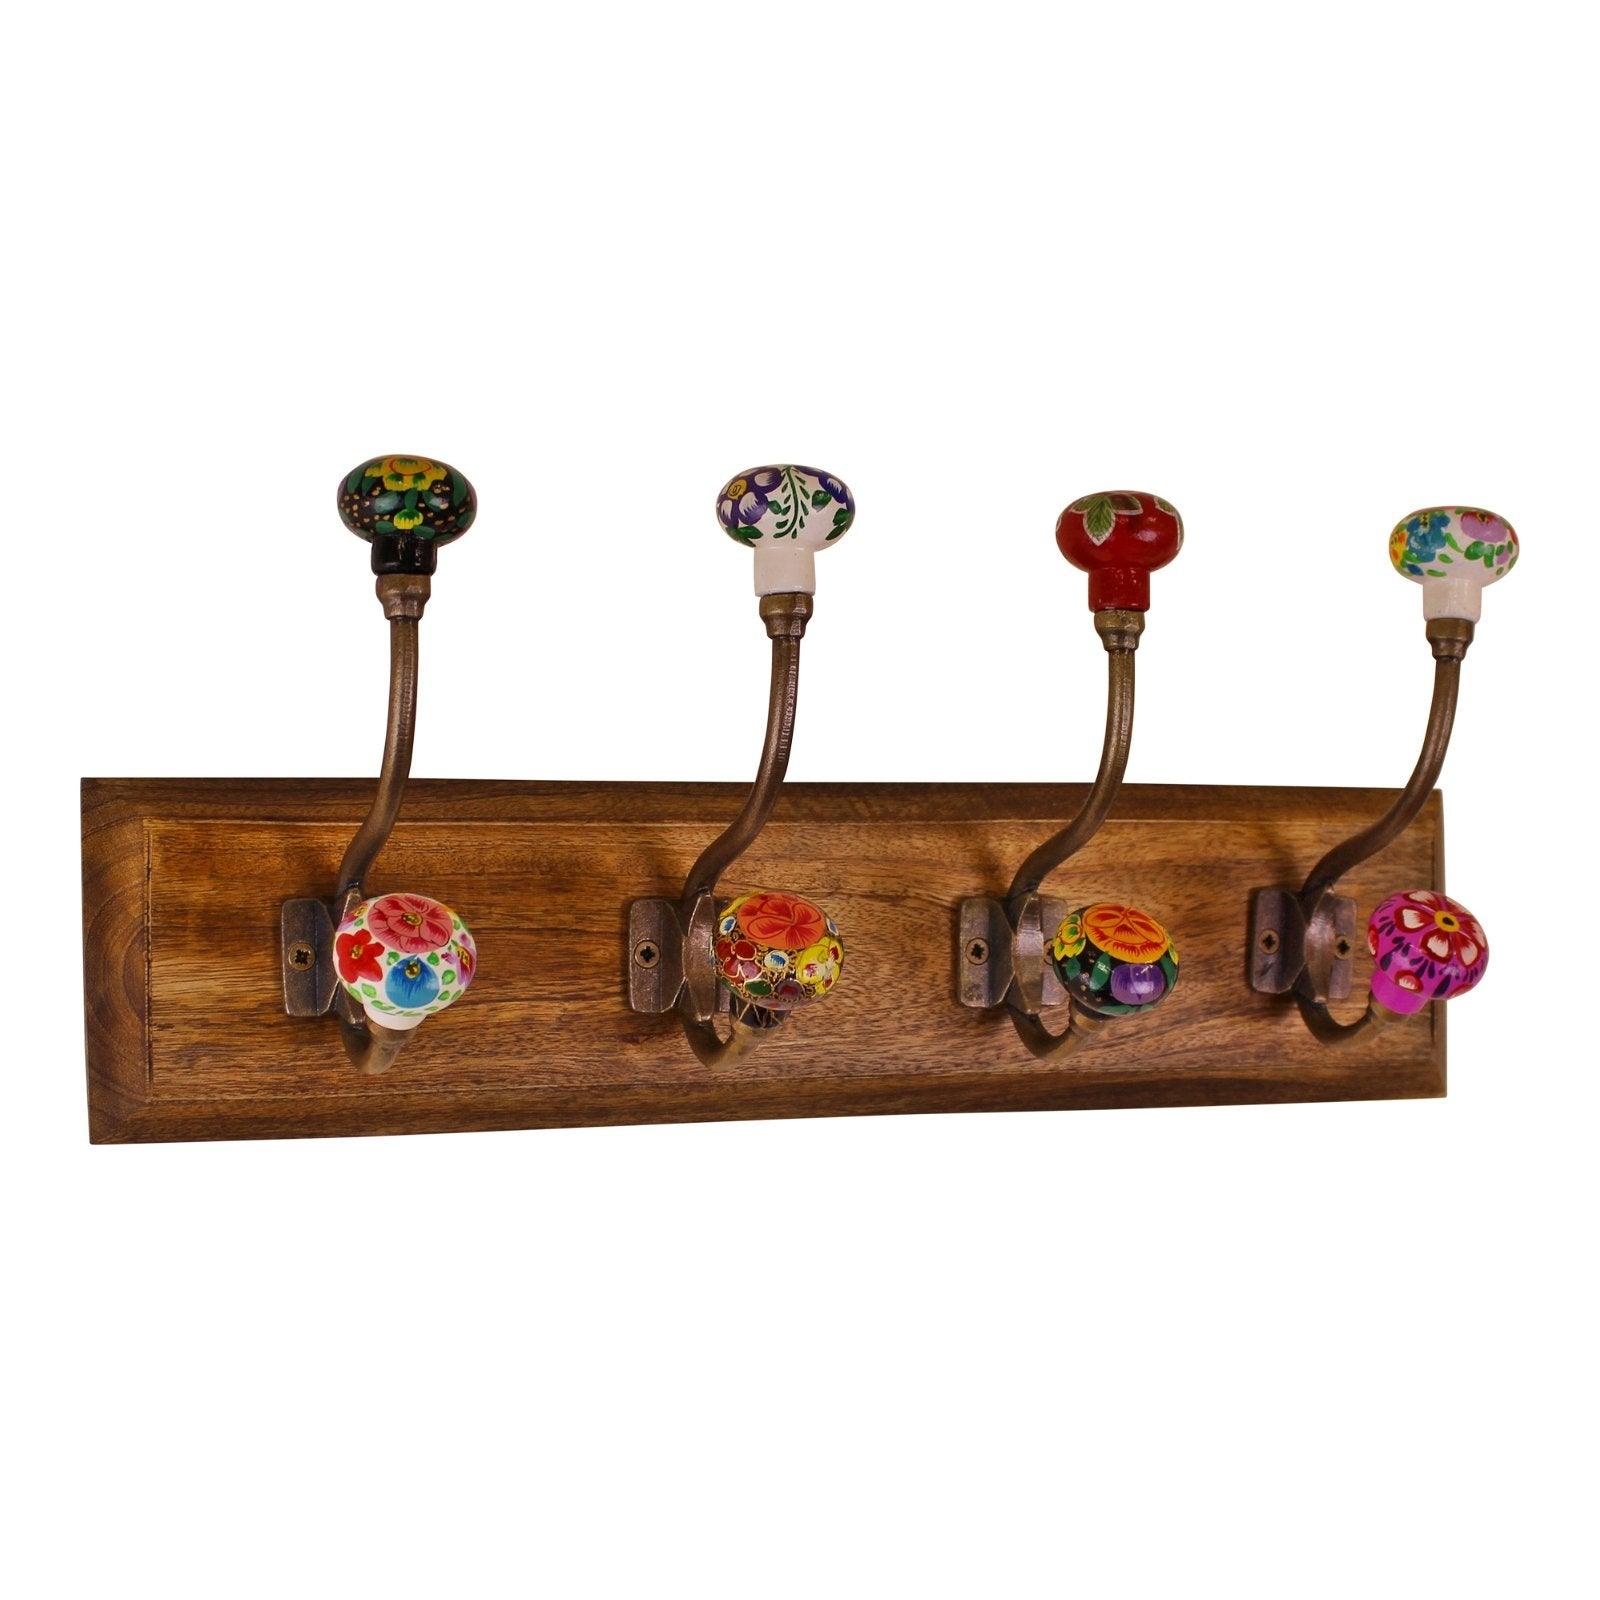 View Mexican Floral Ceramic Hooks on Wooden Base information